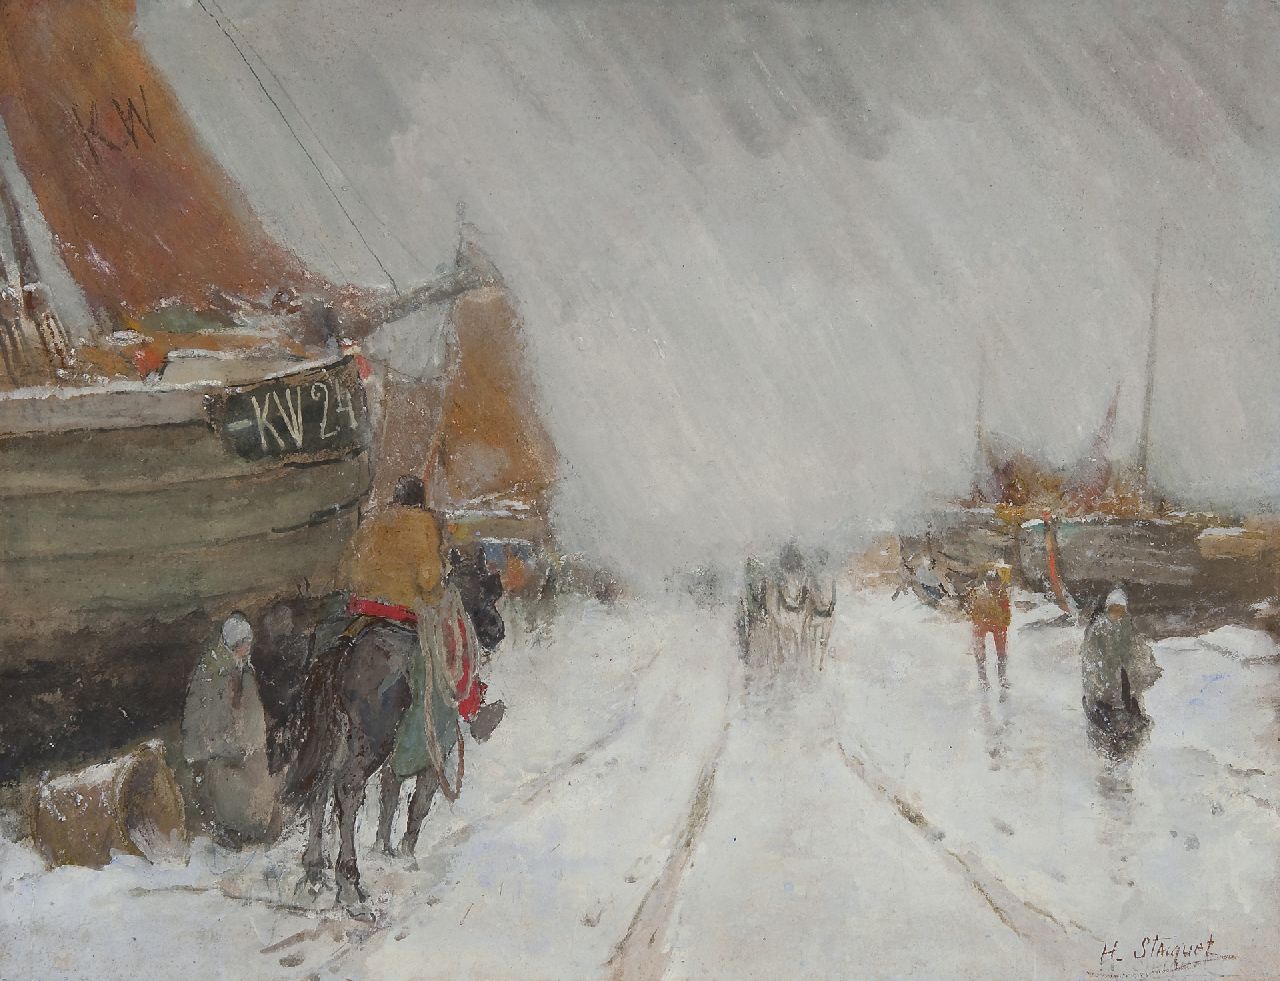 Henri Stacquet | The KW 24 in the snow, gouache on paper, 50.0 x 60.0 cm, signed l.r.